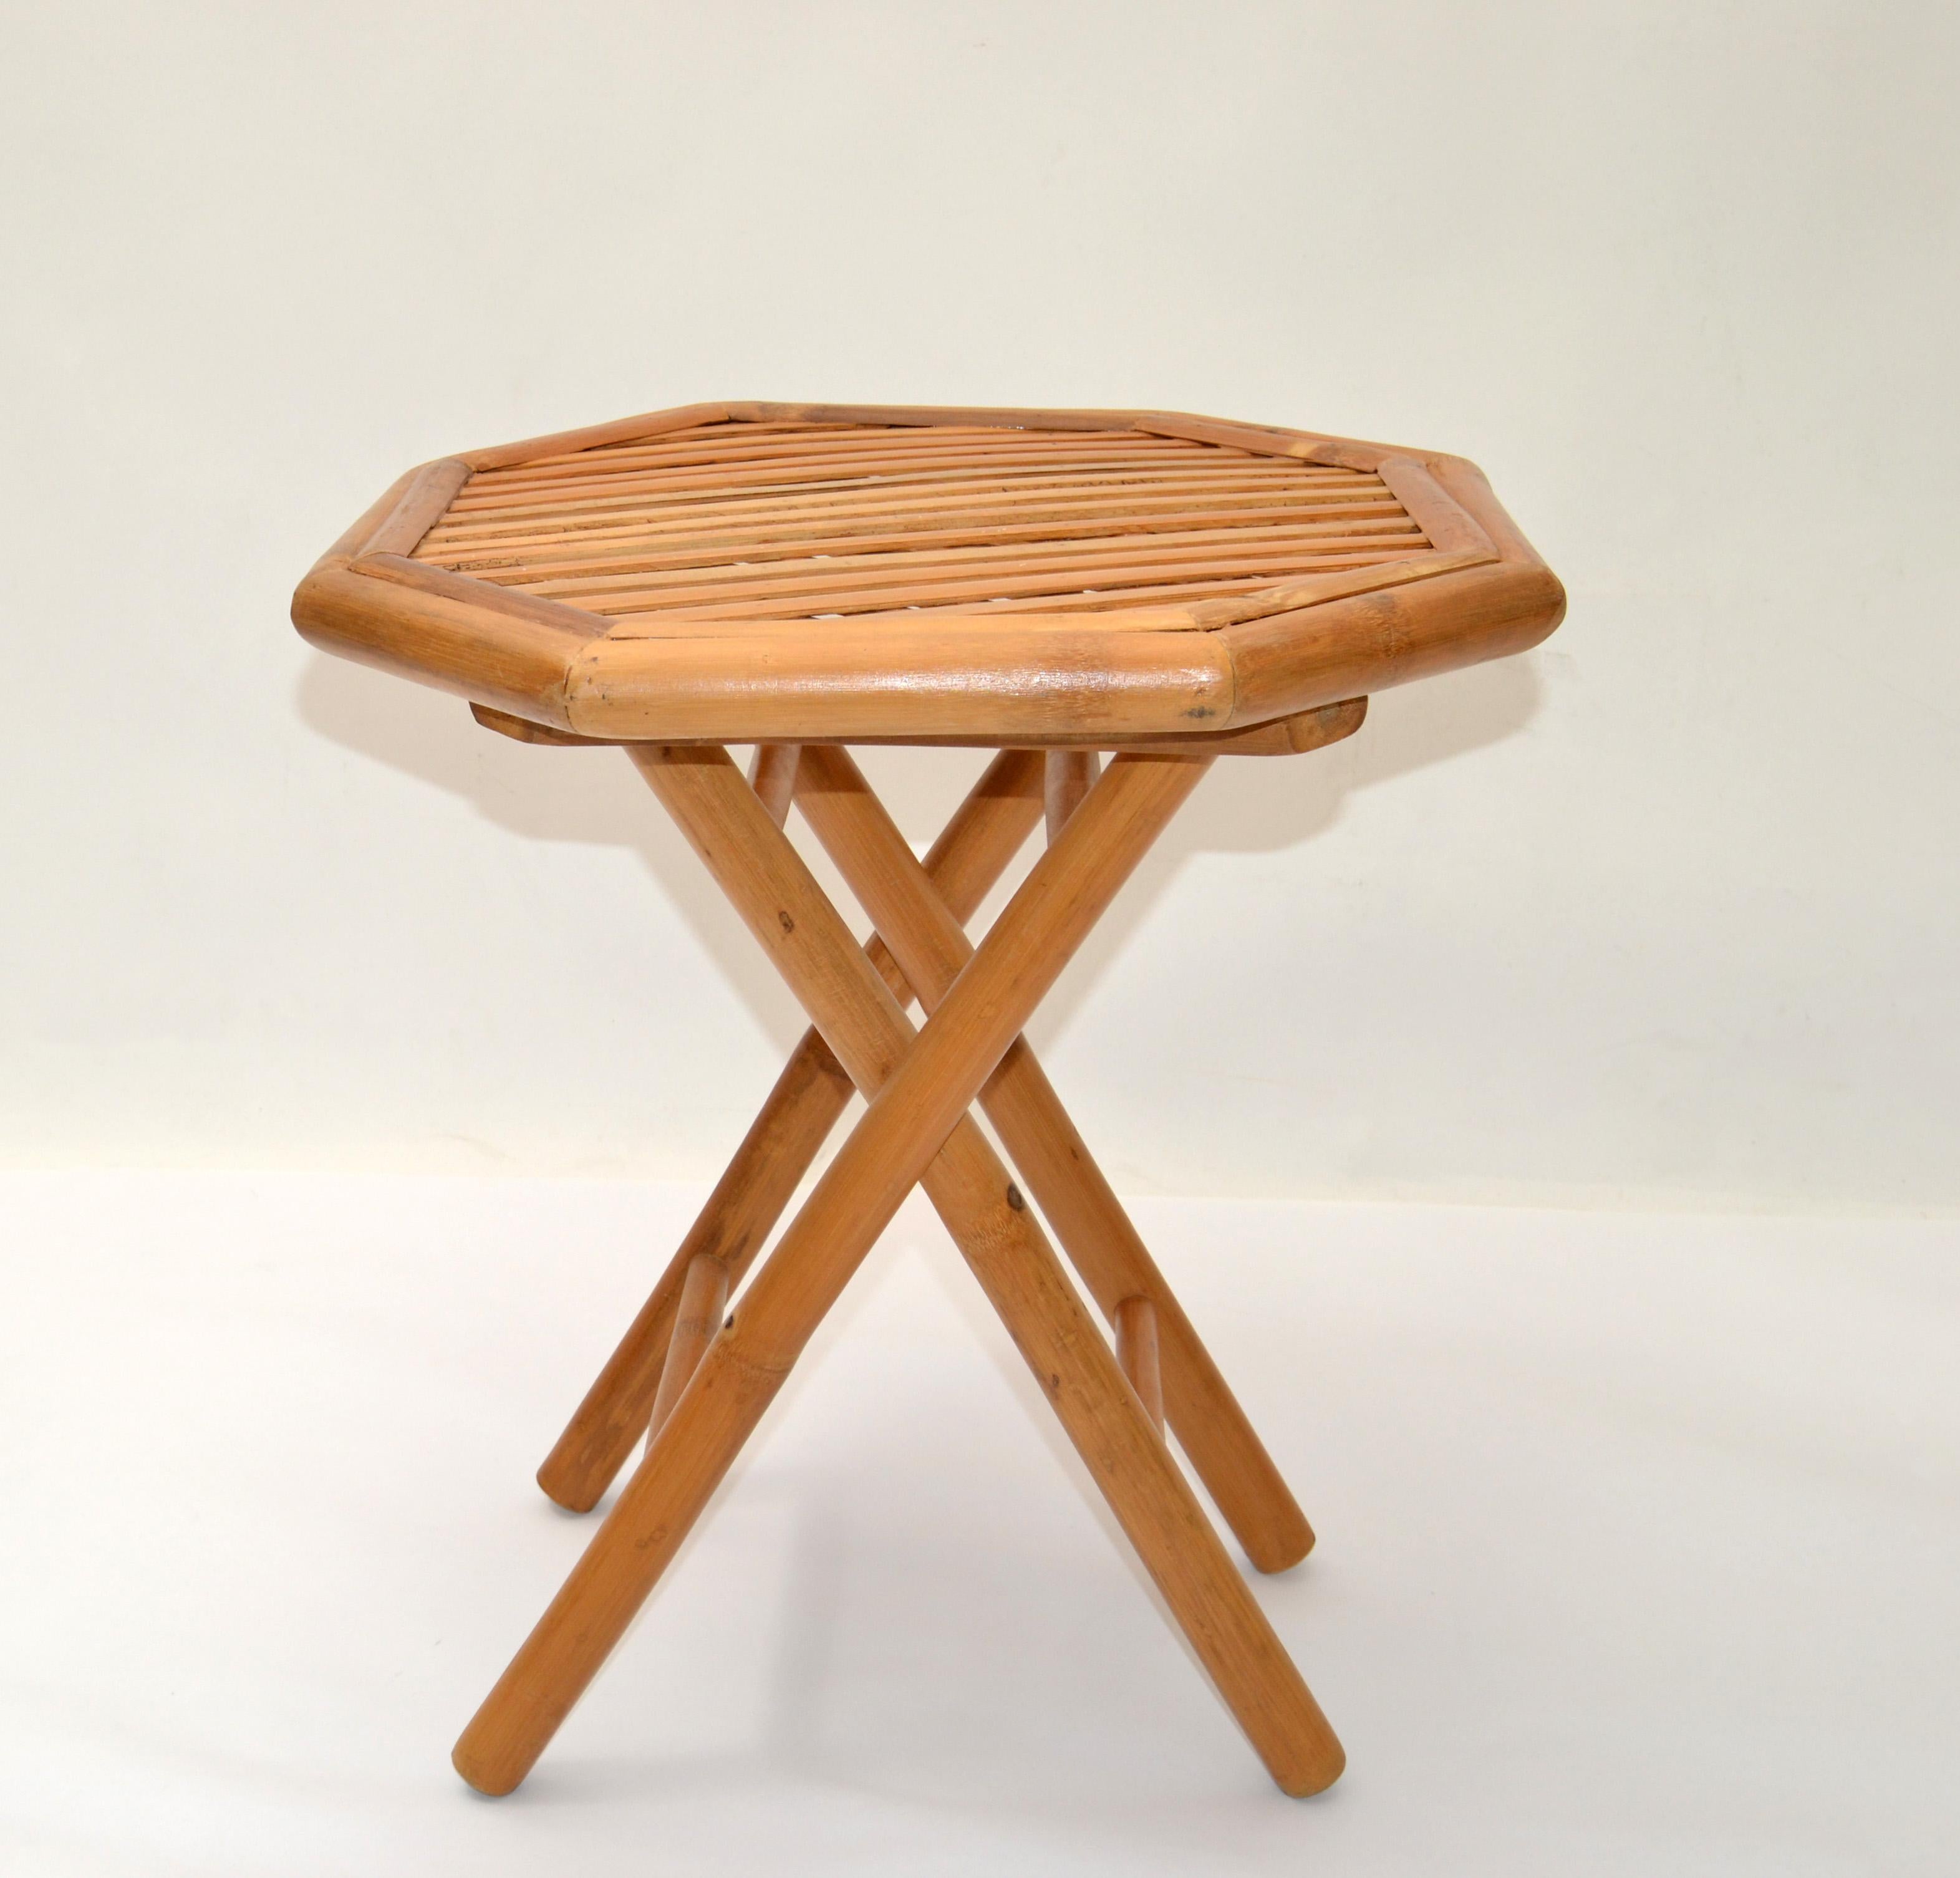 1970s Mid-Century Modern handcrafted and handwoven octagonal bamboo foldable side table.
Decorative and sturdy X base.
The table is easy to fold and uses a small storage place.
Measurement folded:
18 x 6 x 34.25 height.